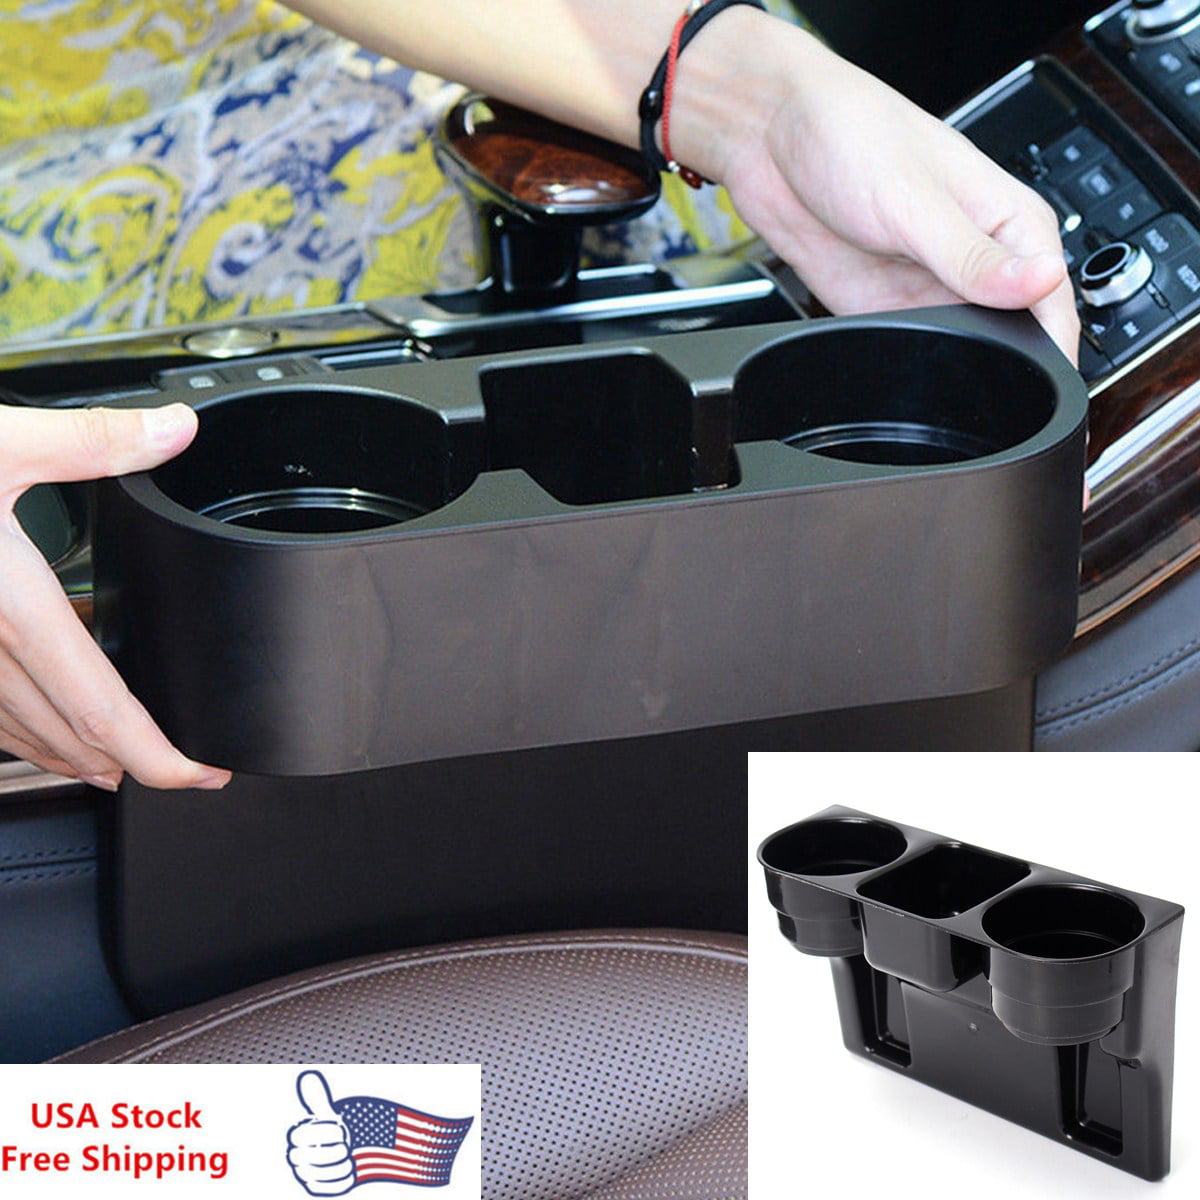 Delleu Multifunctional Universal Car Cup Holder,Seat Back Drinking Bracket,Car Seat Wedge Water Bottle Double Cup Holder